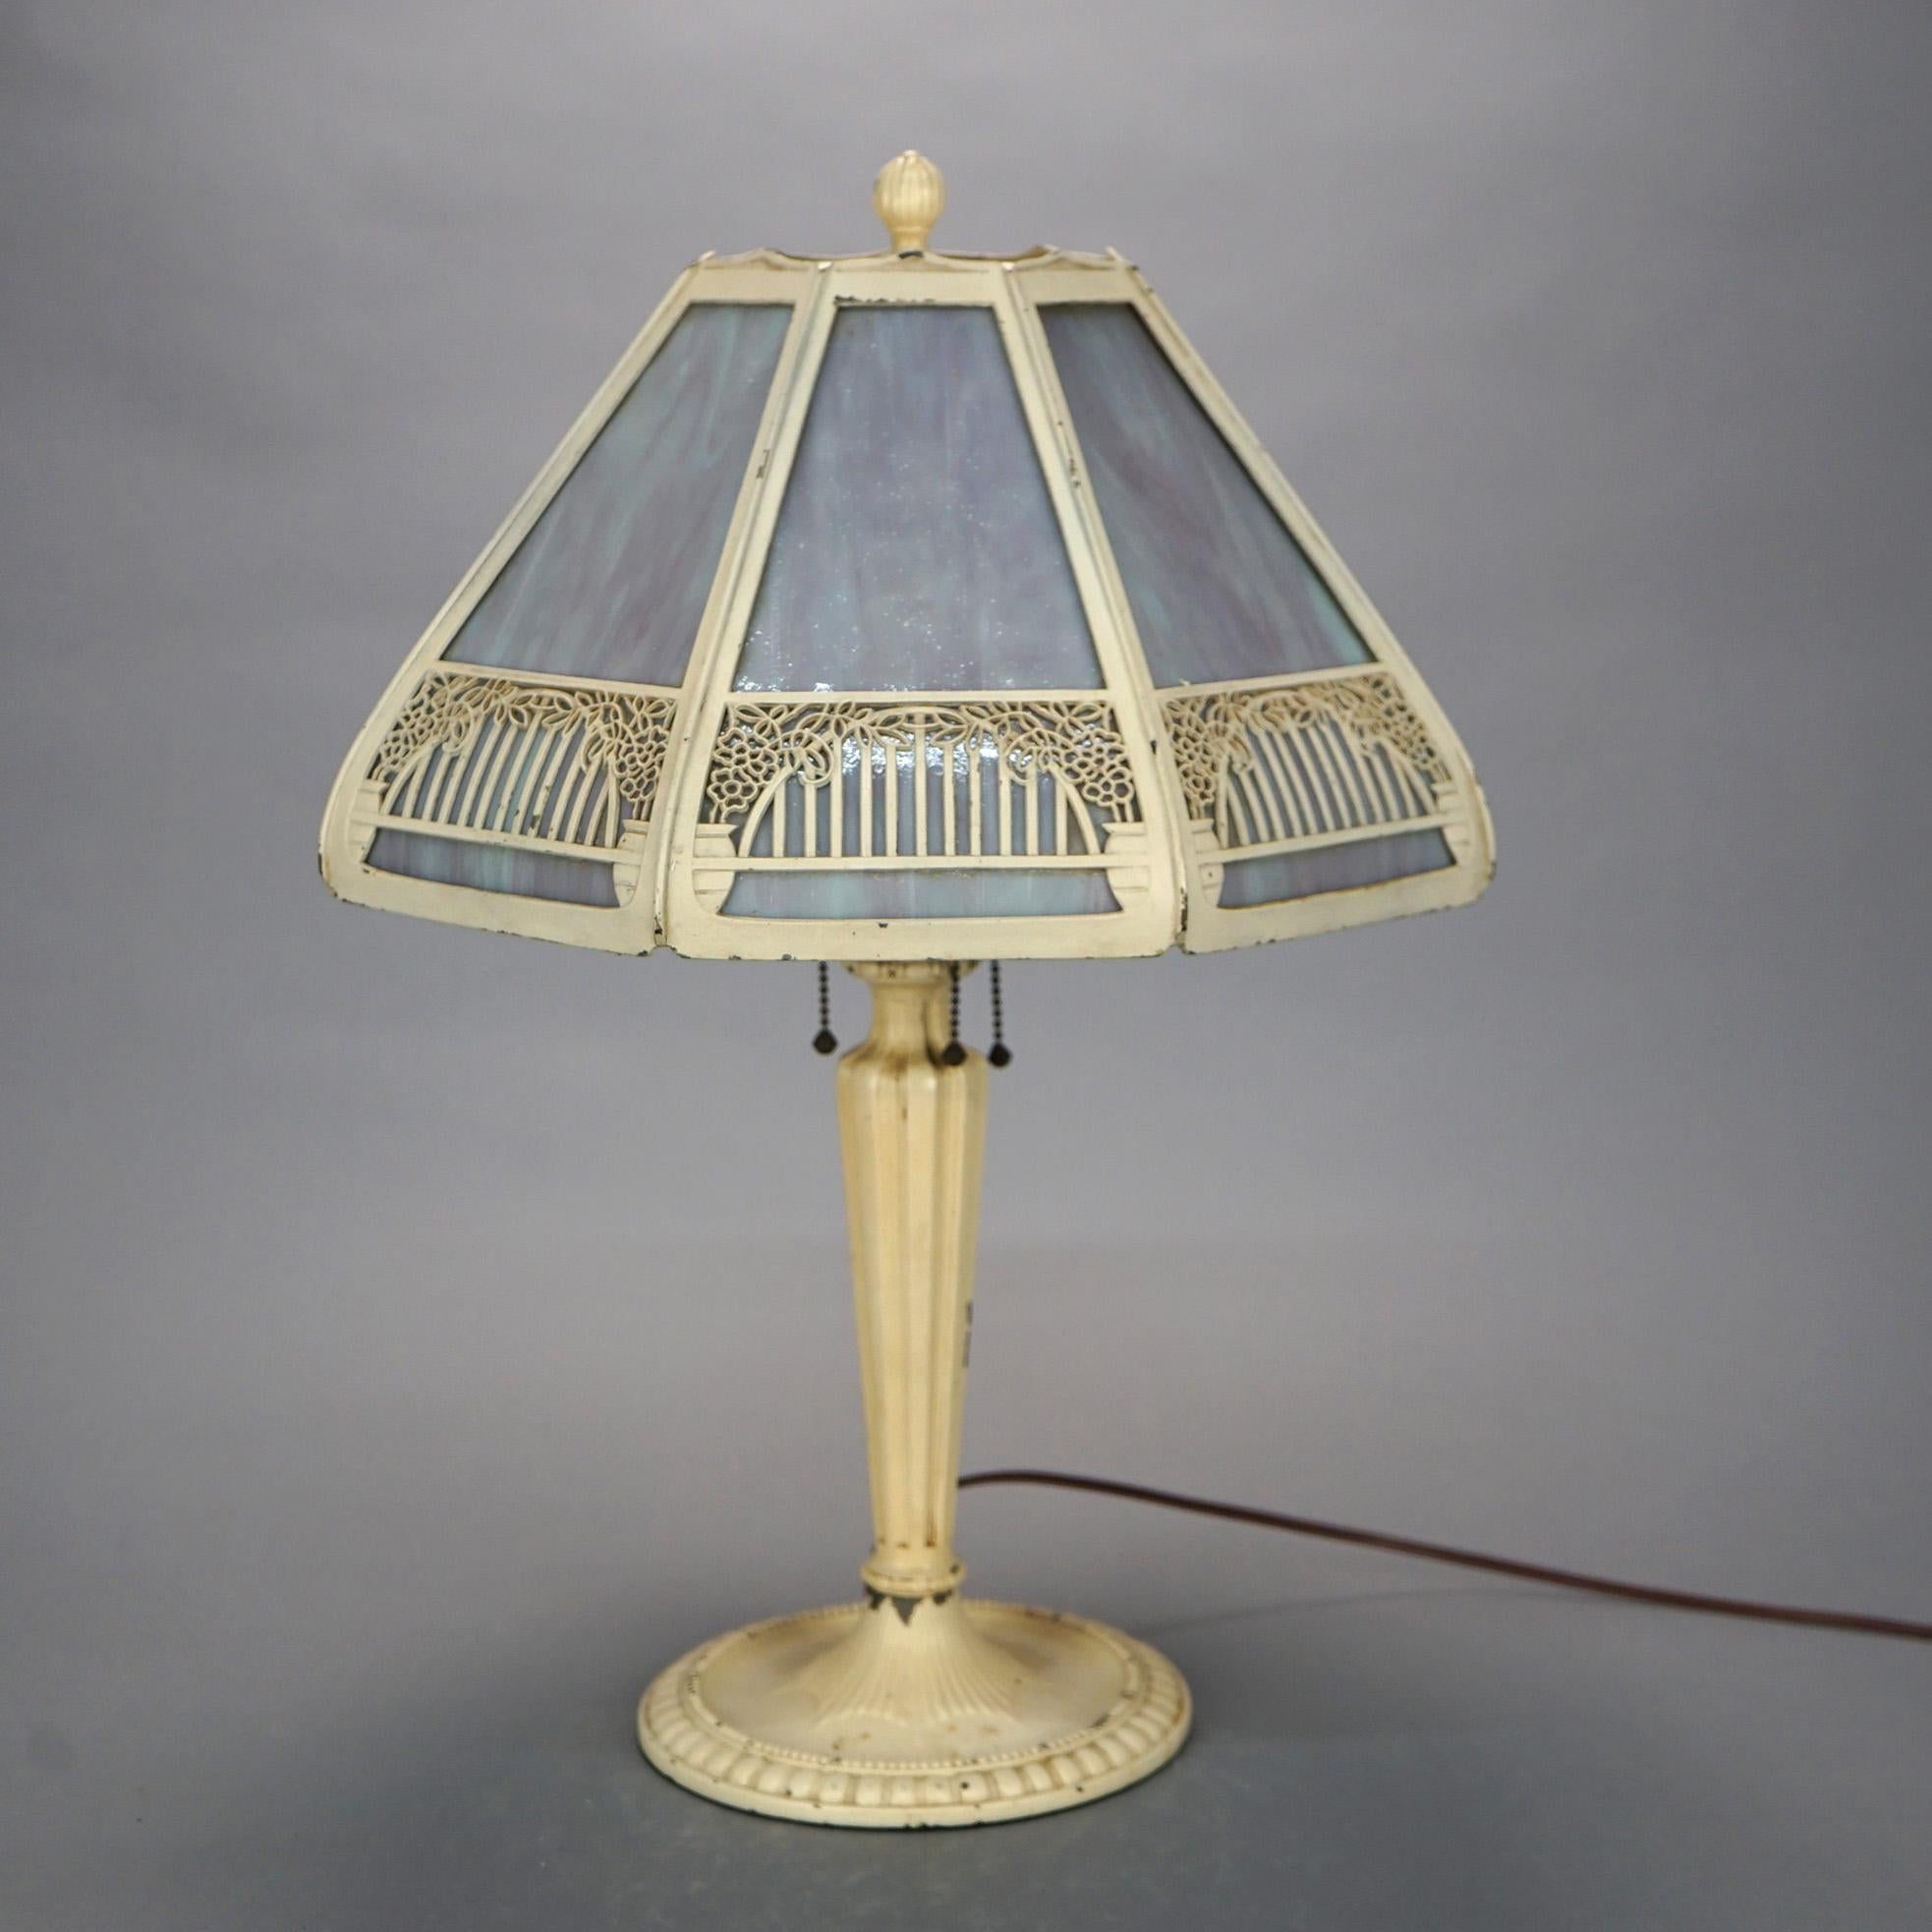 An antique Arts & Crafts table lamp offers cast shade with stylized floral filigree housing paneled slag glass over triple socket cast base, c 1920.

Measures: 22.5'' H x 15.5'' W x 15.5'' D.